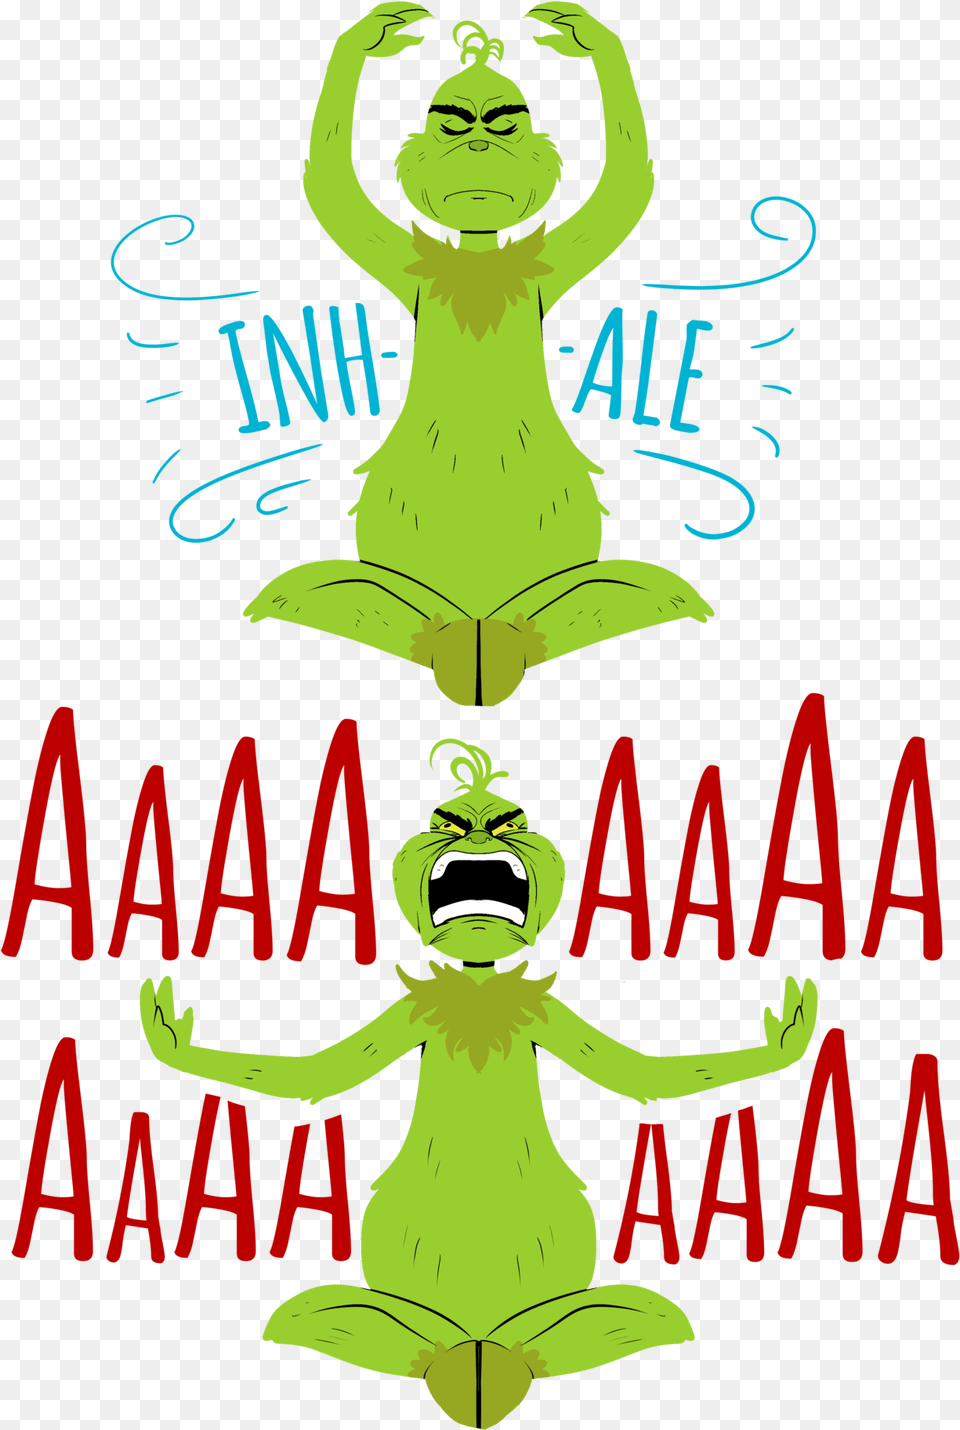 The Grinch Is Releasing Some Anxiety With Some Yogayou El Grinch Haciendo Yoga, Person, Face, Head, Logo Png